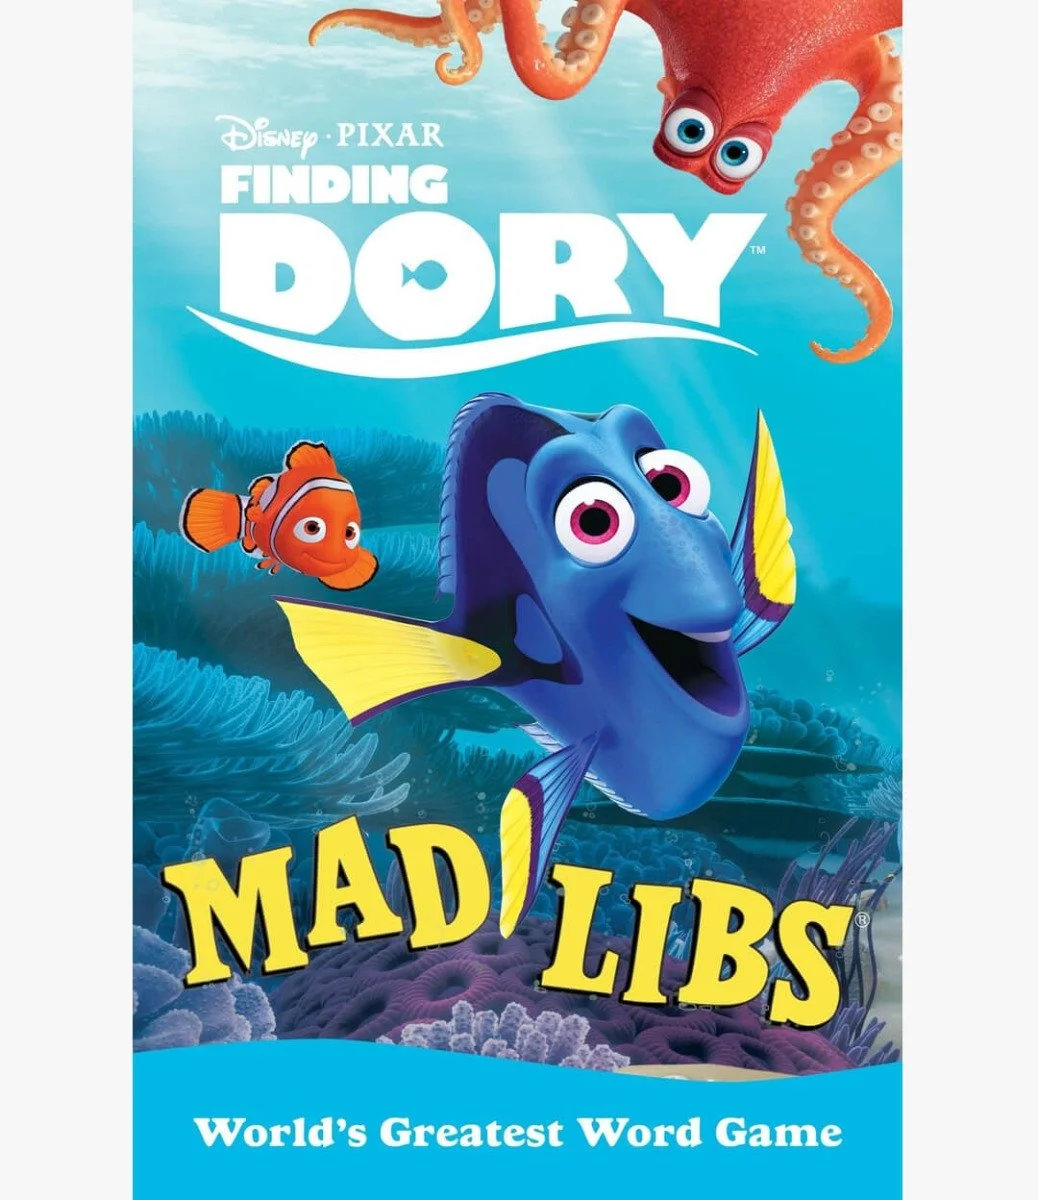 Finding Dory Mad Libs